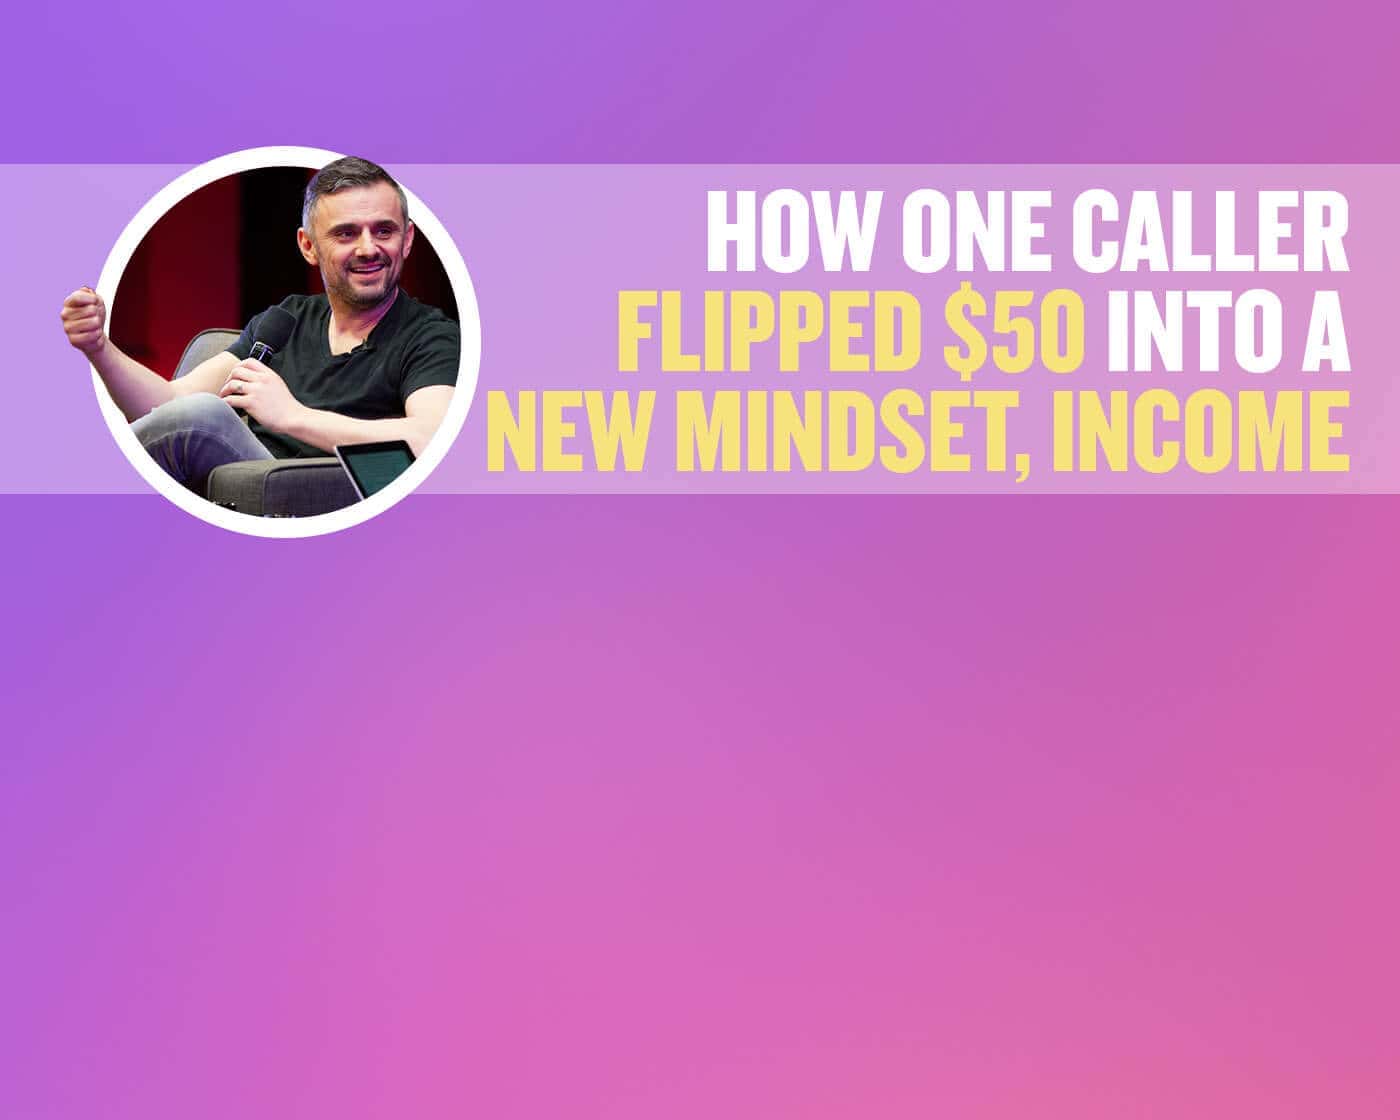 How One Caller Flipped $50 Into A New Mindset and Income